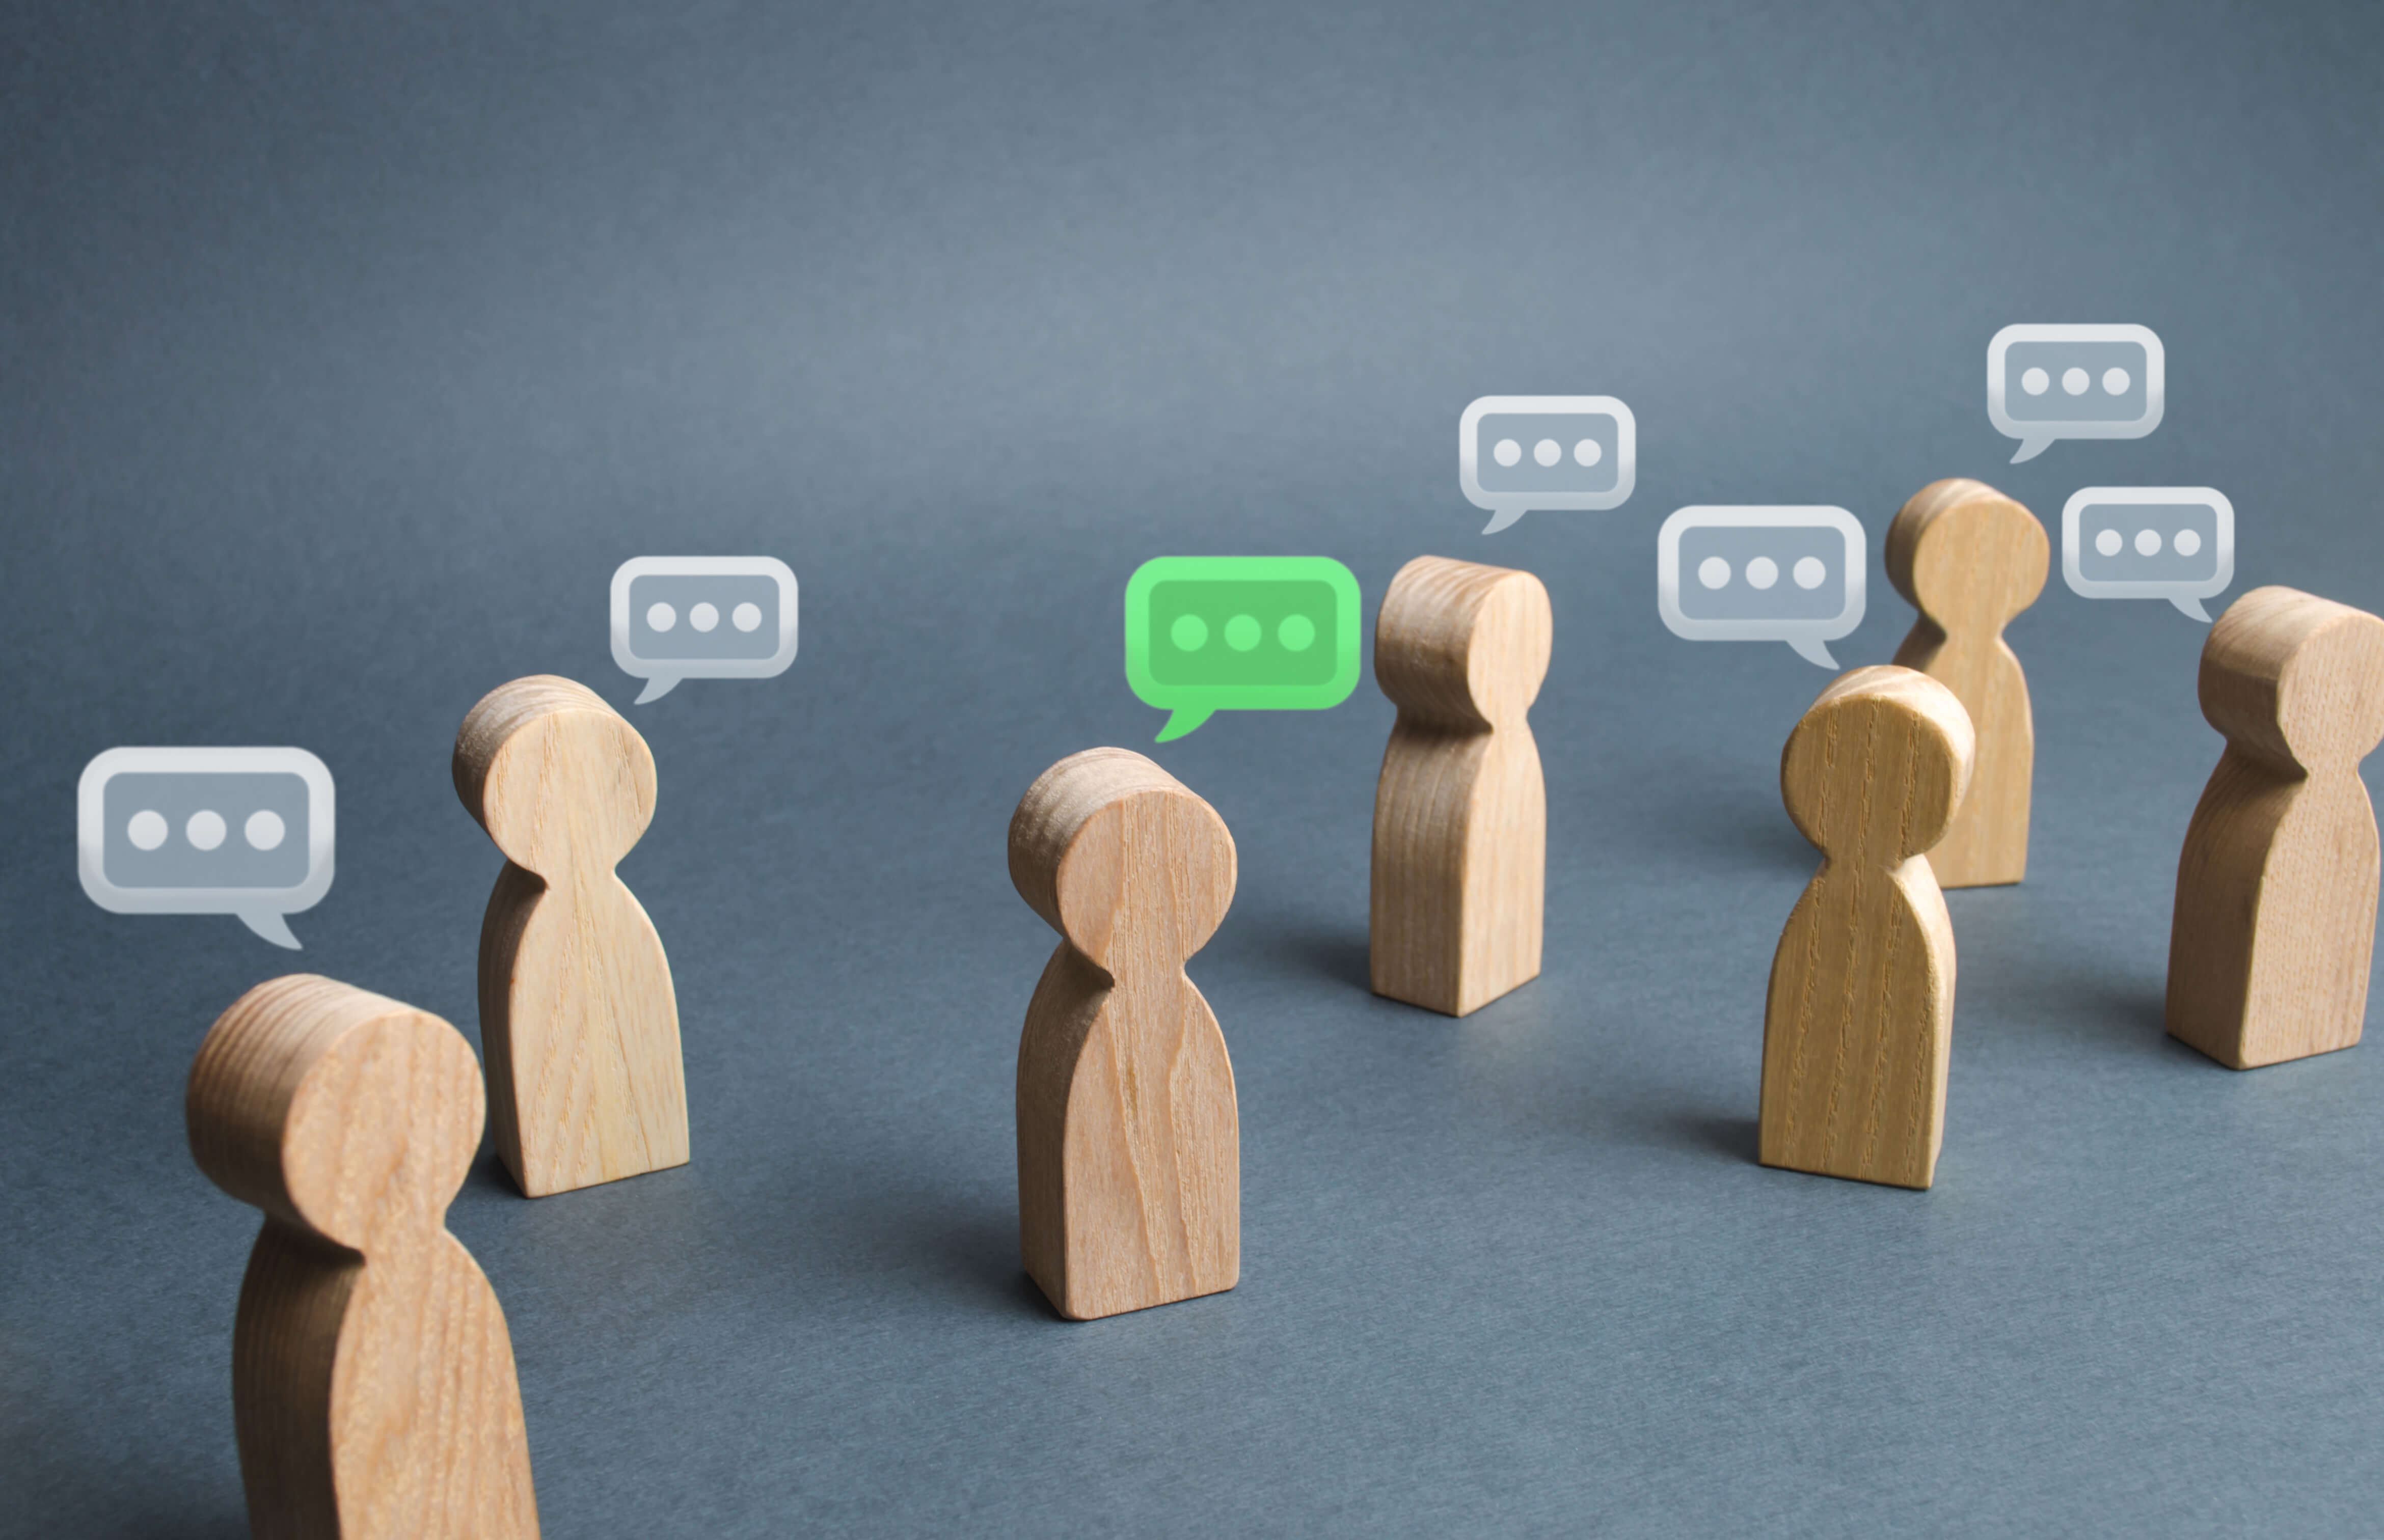 Image shows wooden blocks shaped like people, each with a speech bubble above their head.